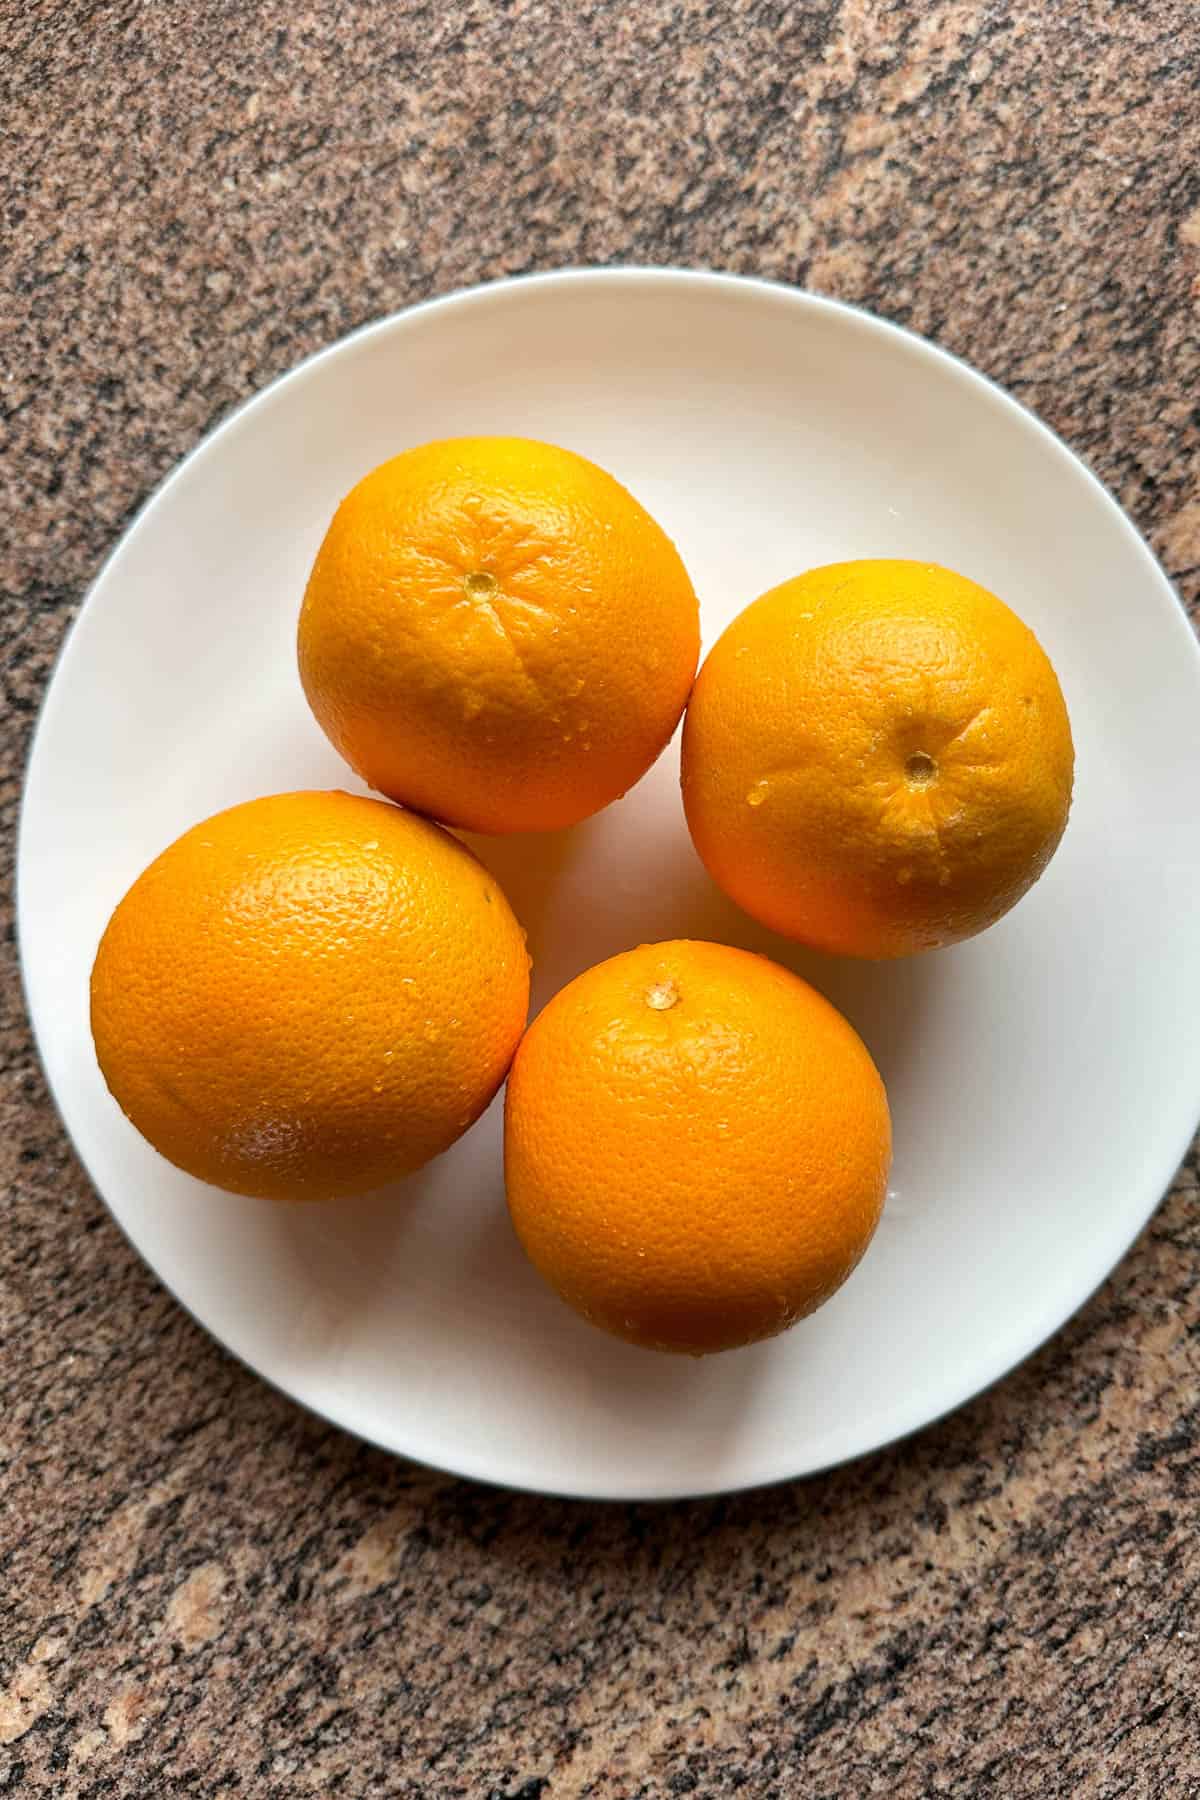 Four oranges on a plate.